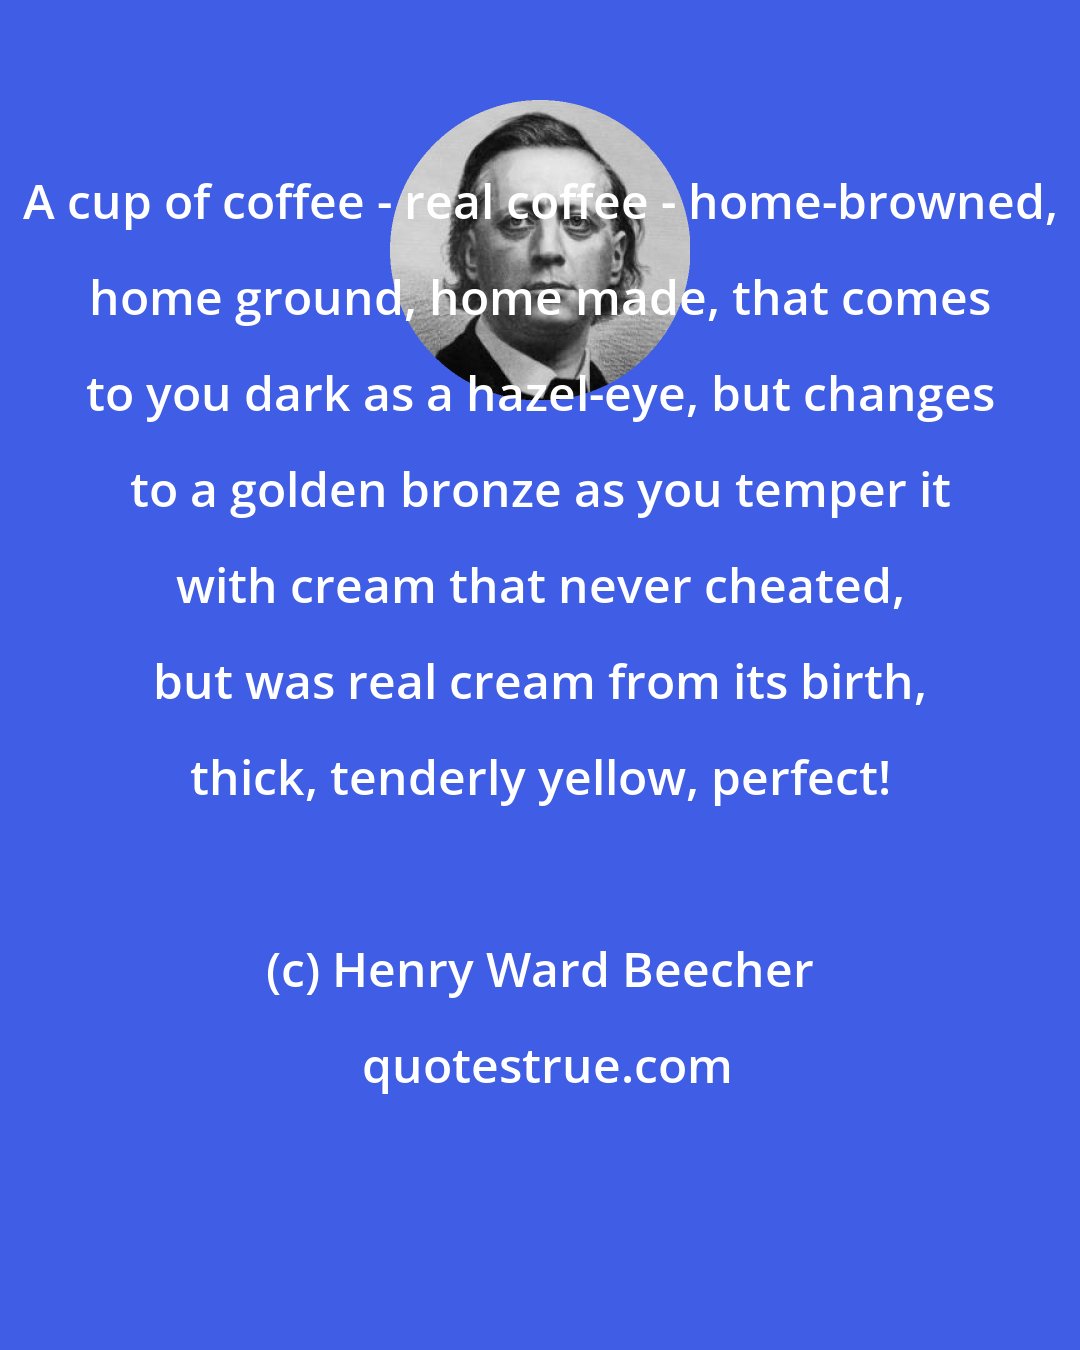 Henry Ward Beecher: A cup of coffee - real coffee - home-browned, home ground, home made, that comes to you dark as a hazel-eye, but changes to a golden bronze as you temper it with cream that never cheated, but was real cream from its birth, thick, tenderly yellow, perfect!